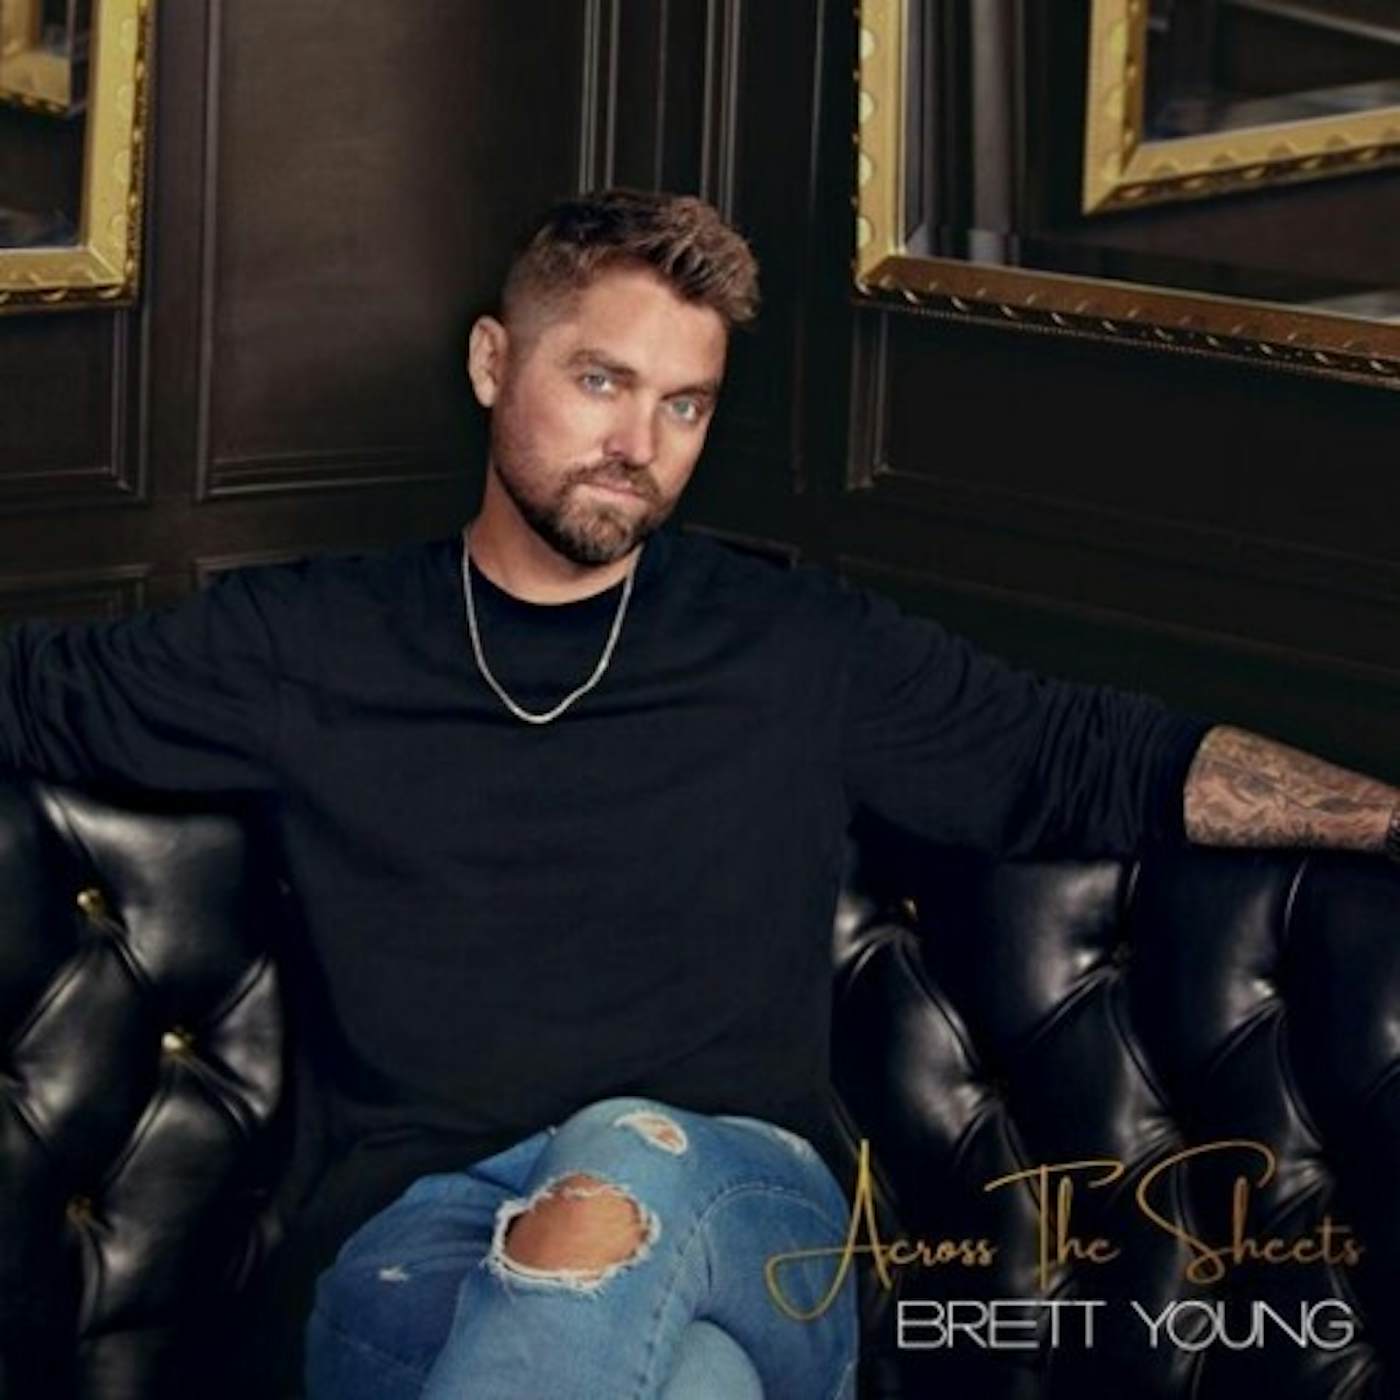 Brett Young ACROSS THE SHEETS CD